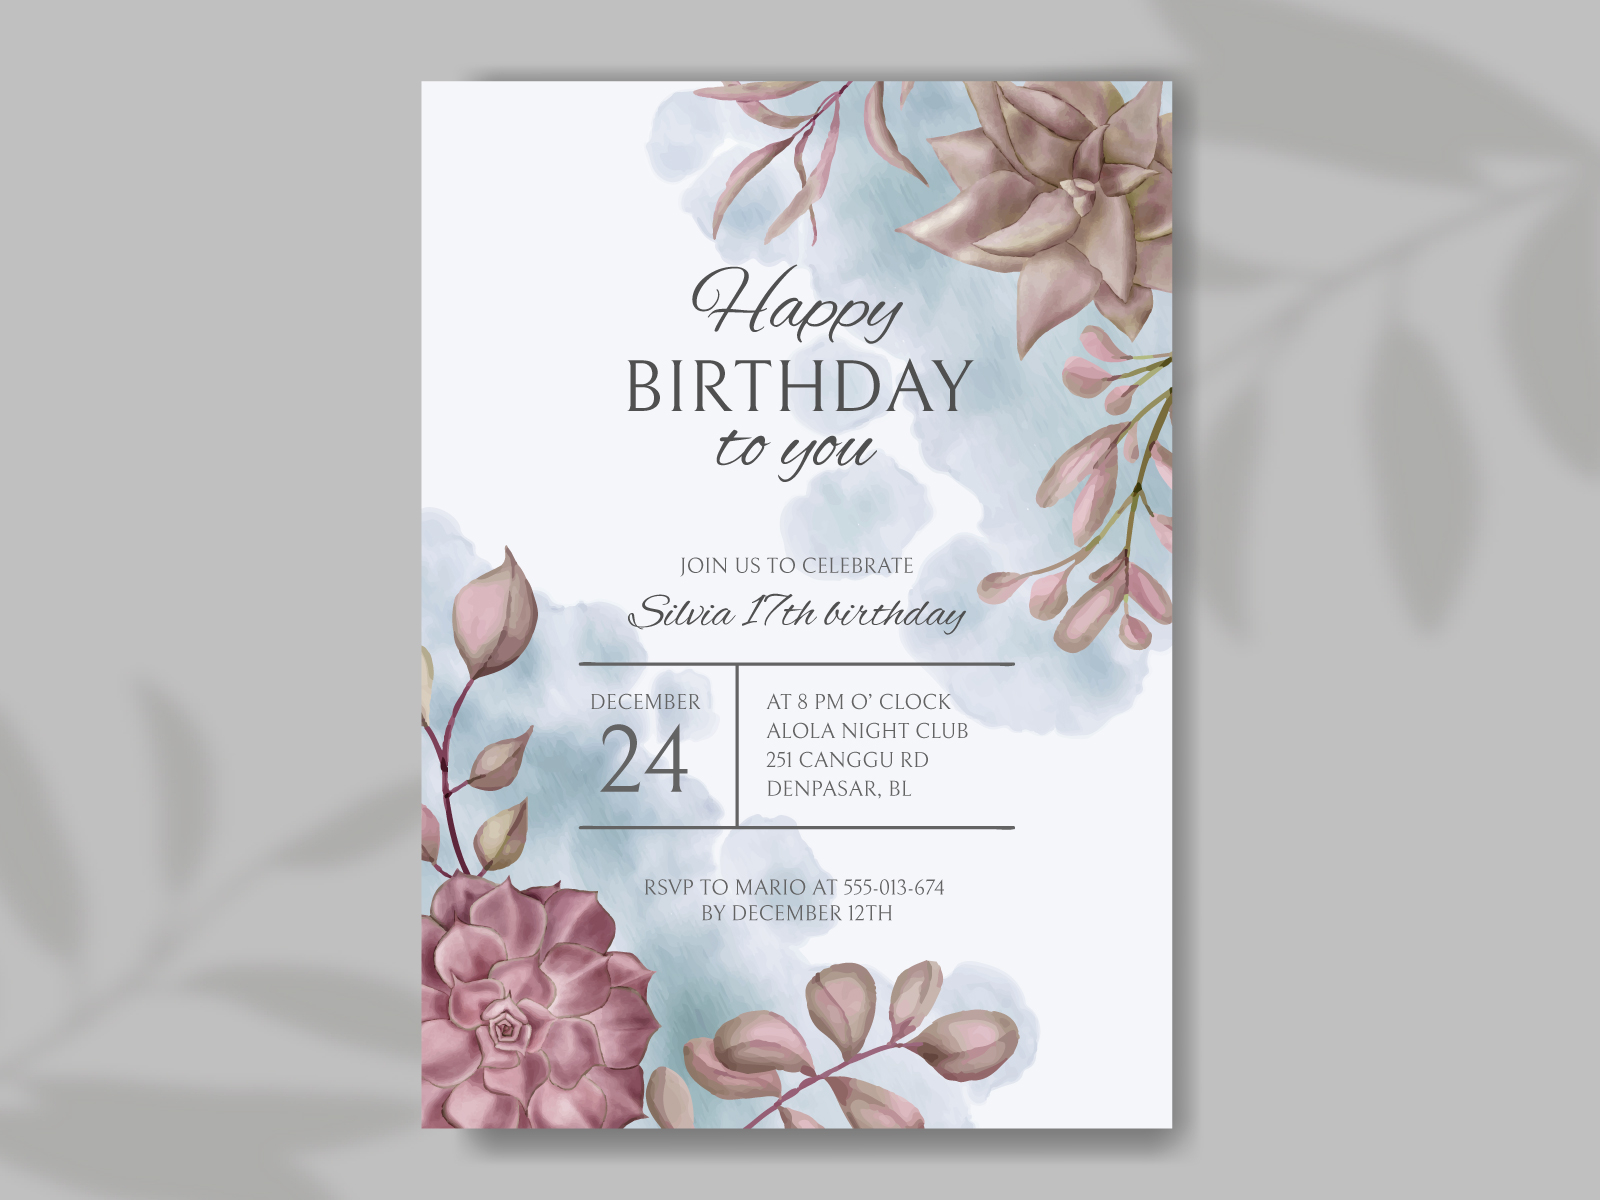 Happy birthday party invitation card with floral background by Dheo Donny  Adittya on Dribbble